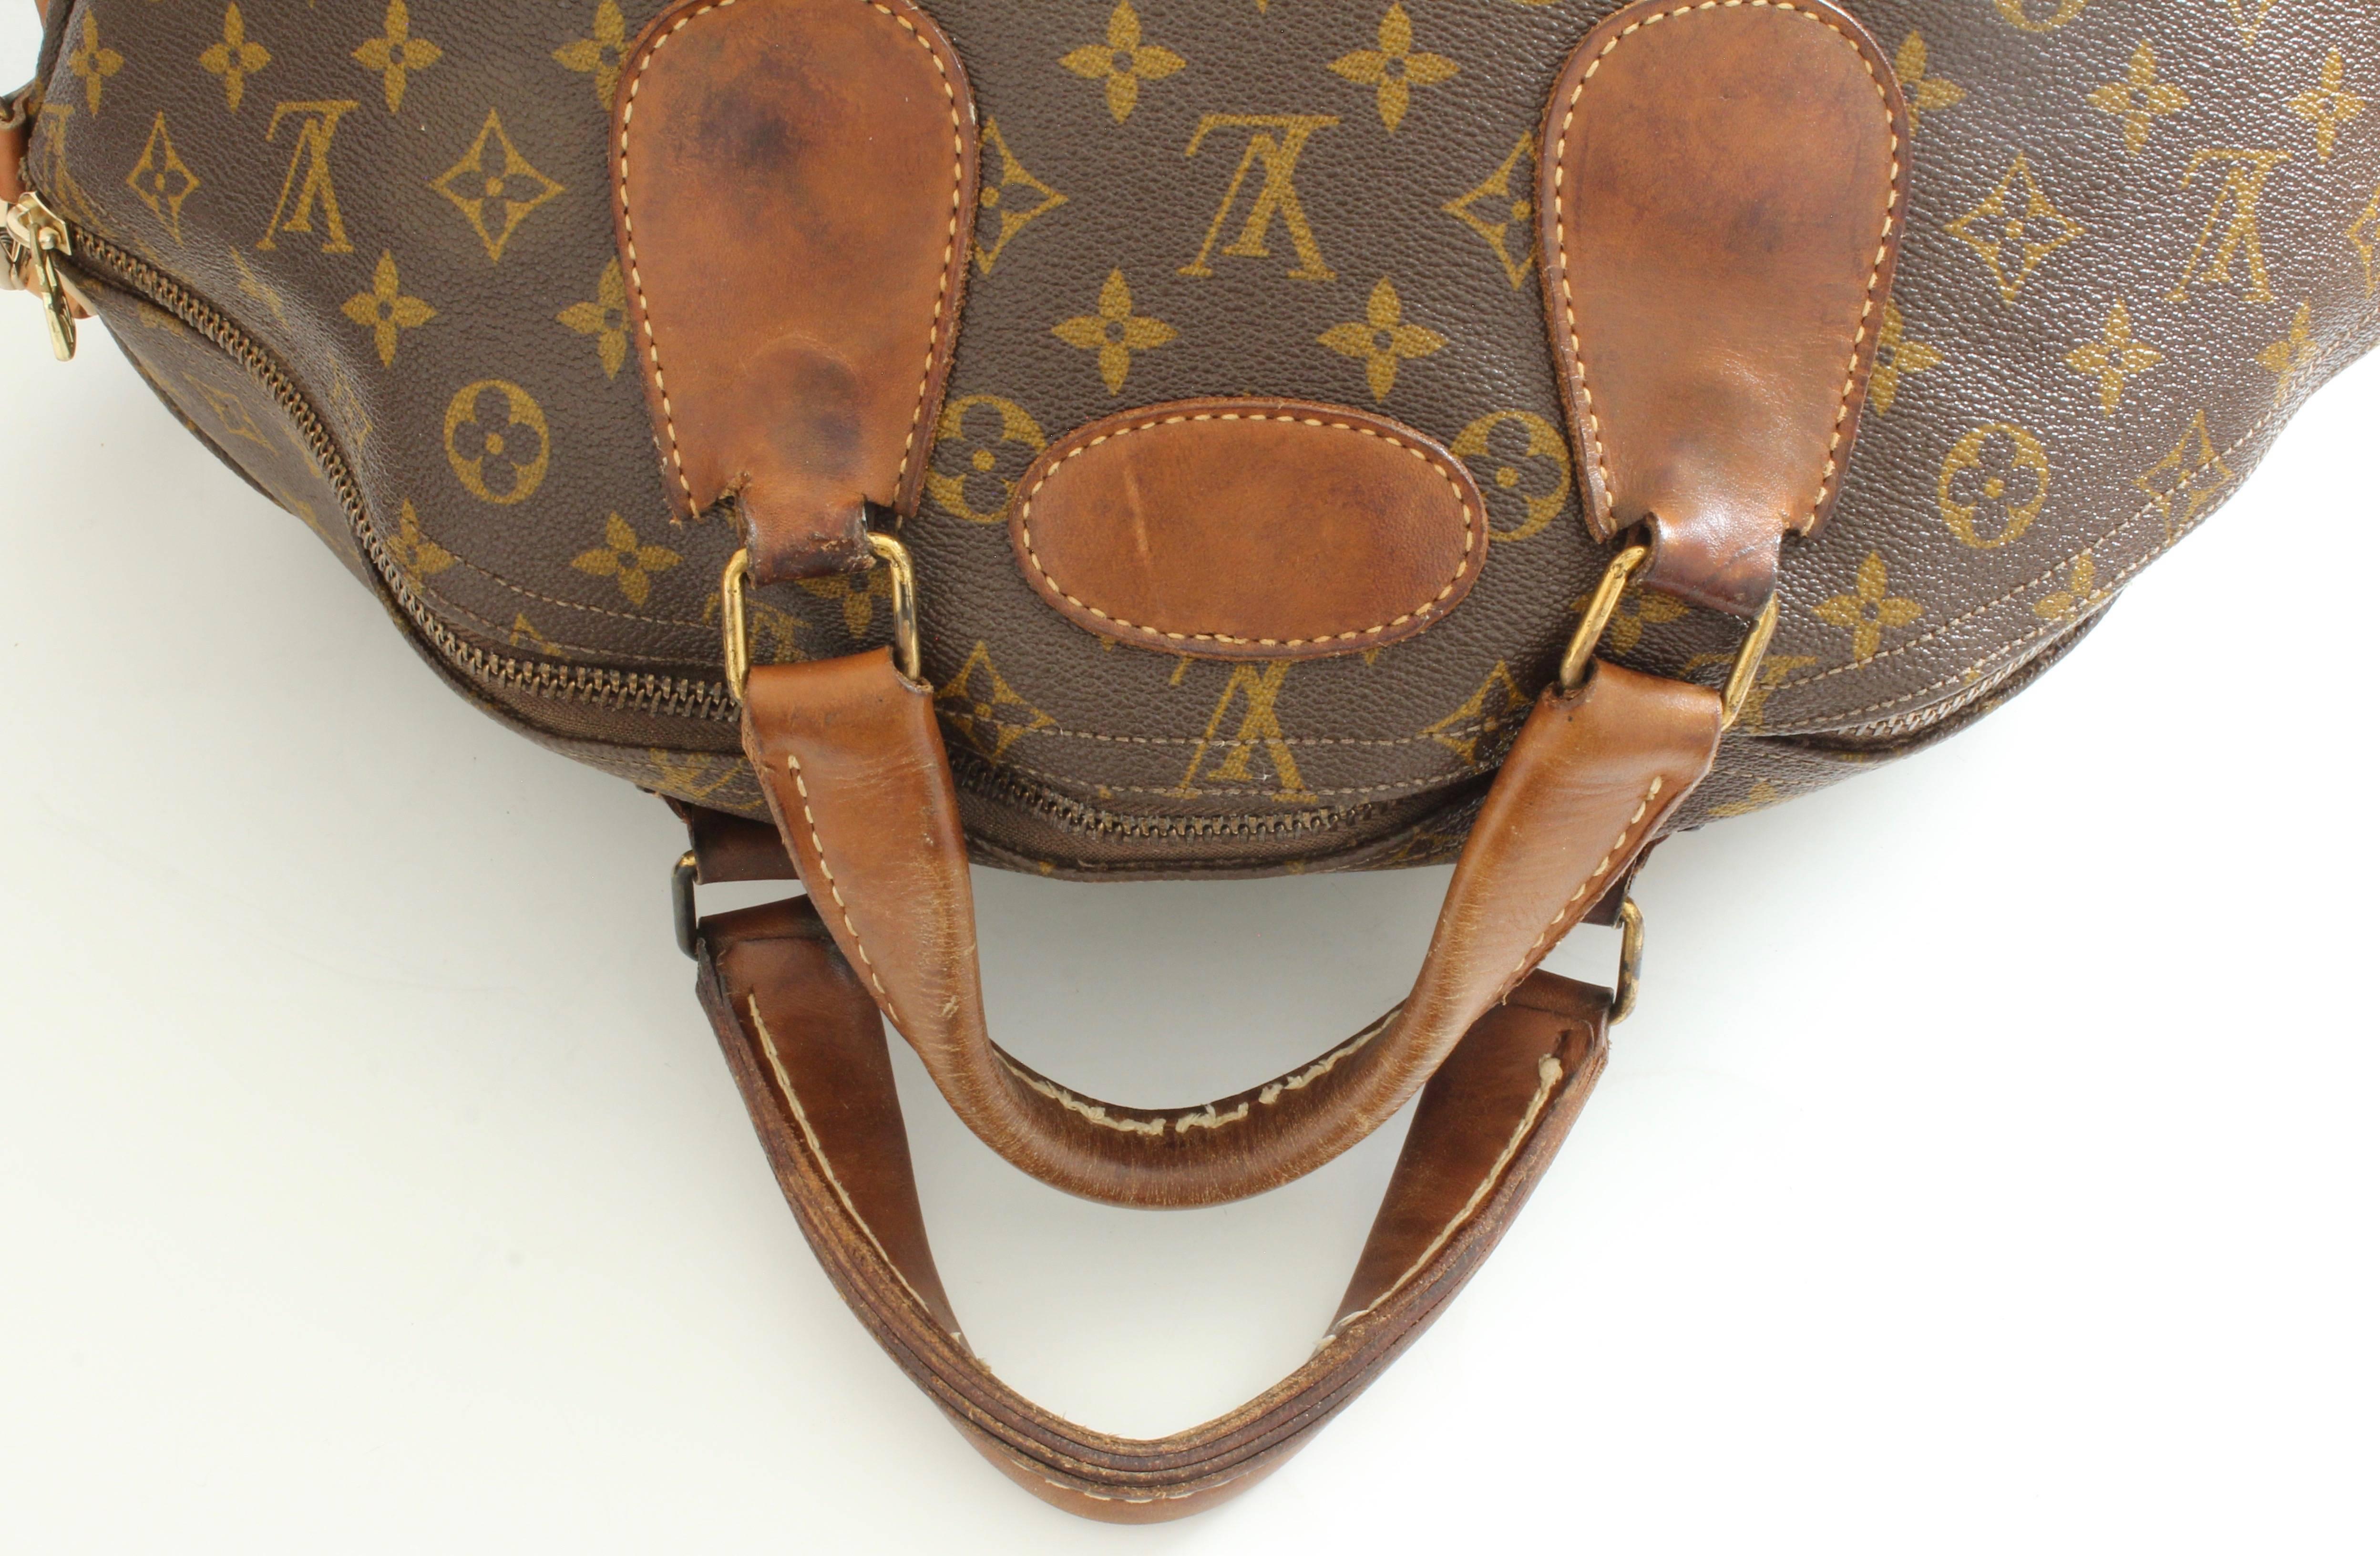 Louis Vuitton Large Steamer Bag Keepall Monogram Travel Tote French Company 70er Jahre 2